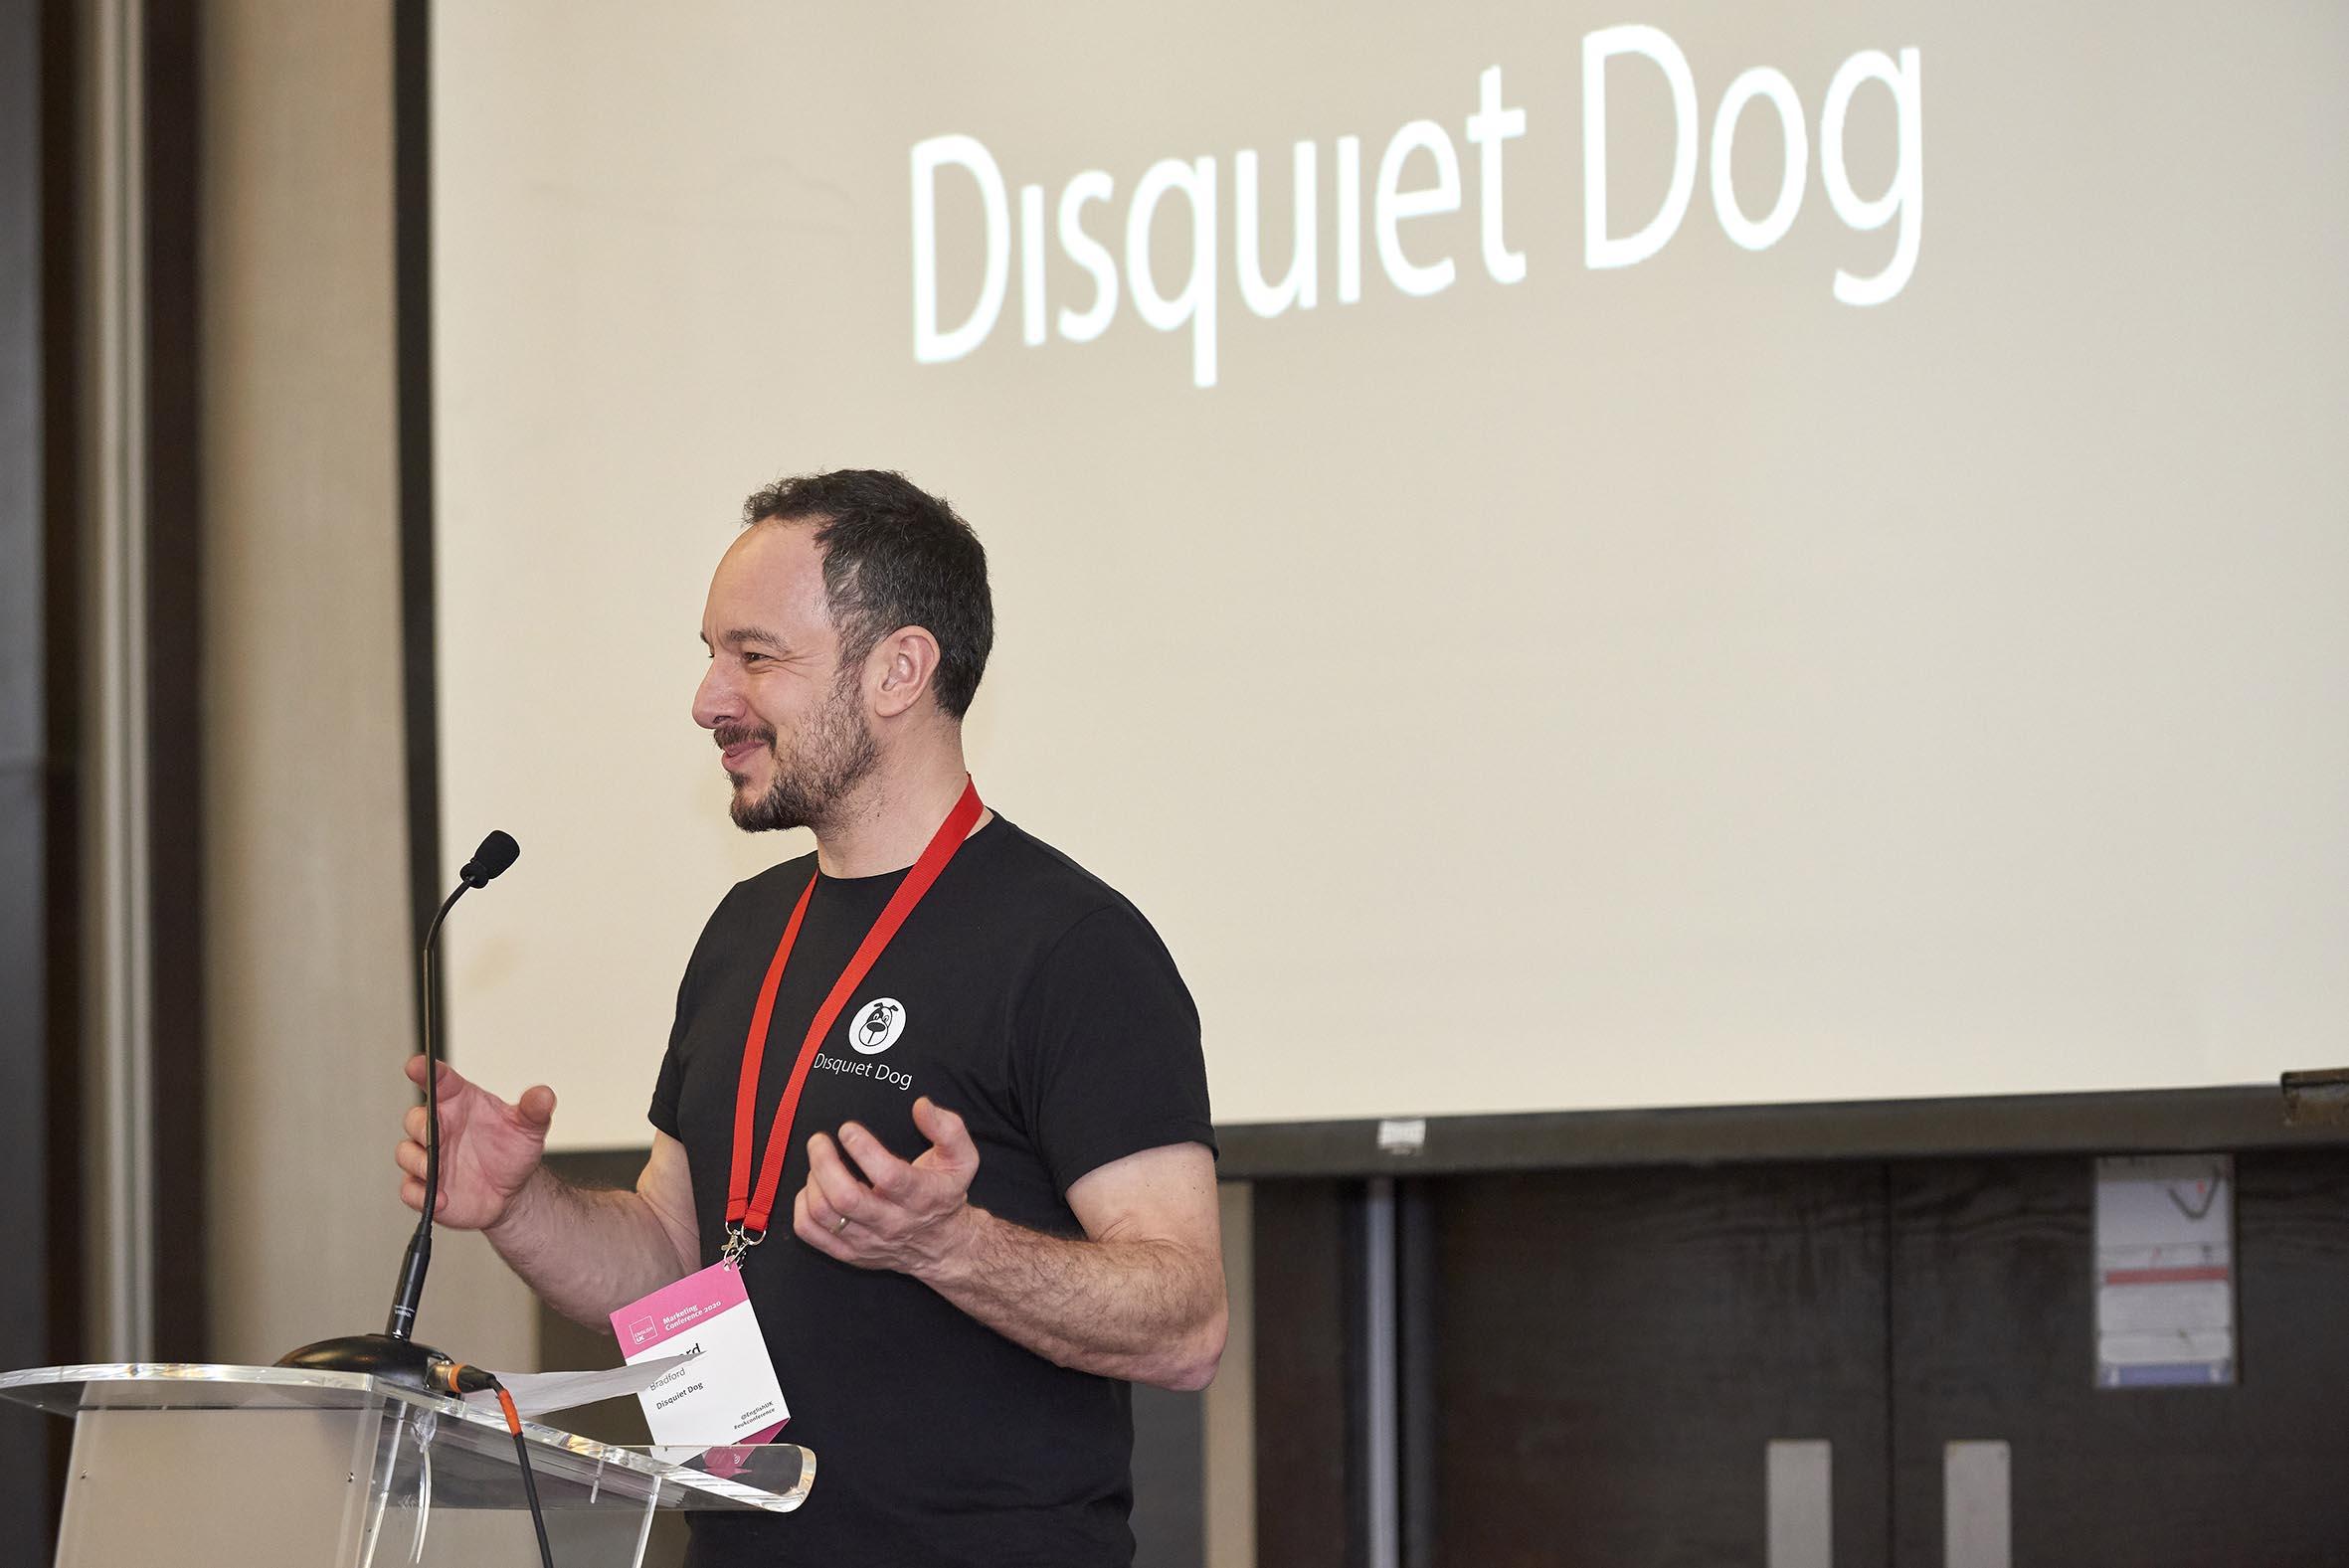 A photo of Disquiet Dog founder, Richard Bradford, speaking at a conference. He's smiling, looking at the audience which are out of the frame. Behind him are the words "Disquiet Dog" projected onto a screen. He's wearing a black T-shirt with the company's logo on it, which is the face of a dog with a black patch over one eye.